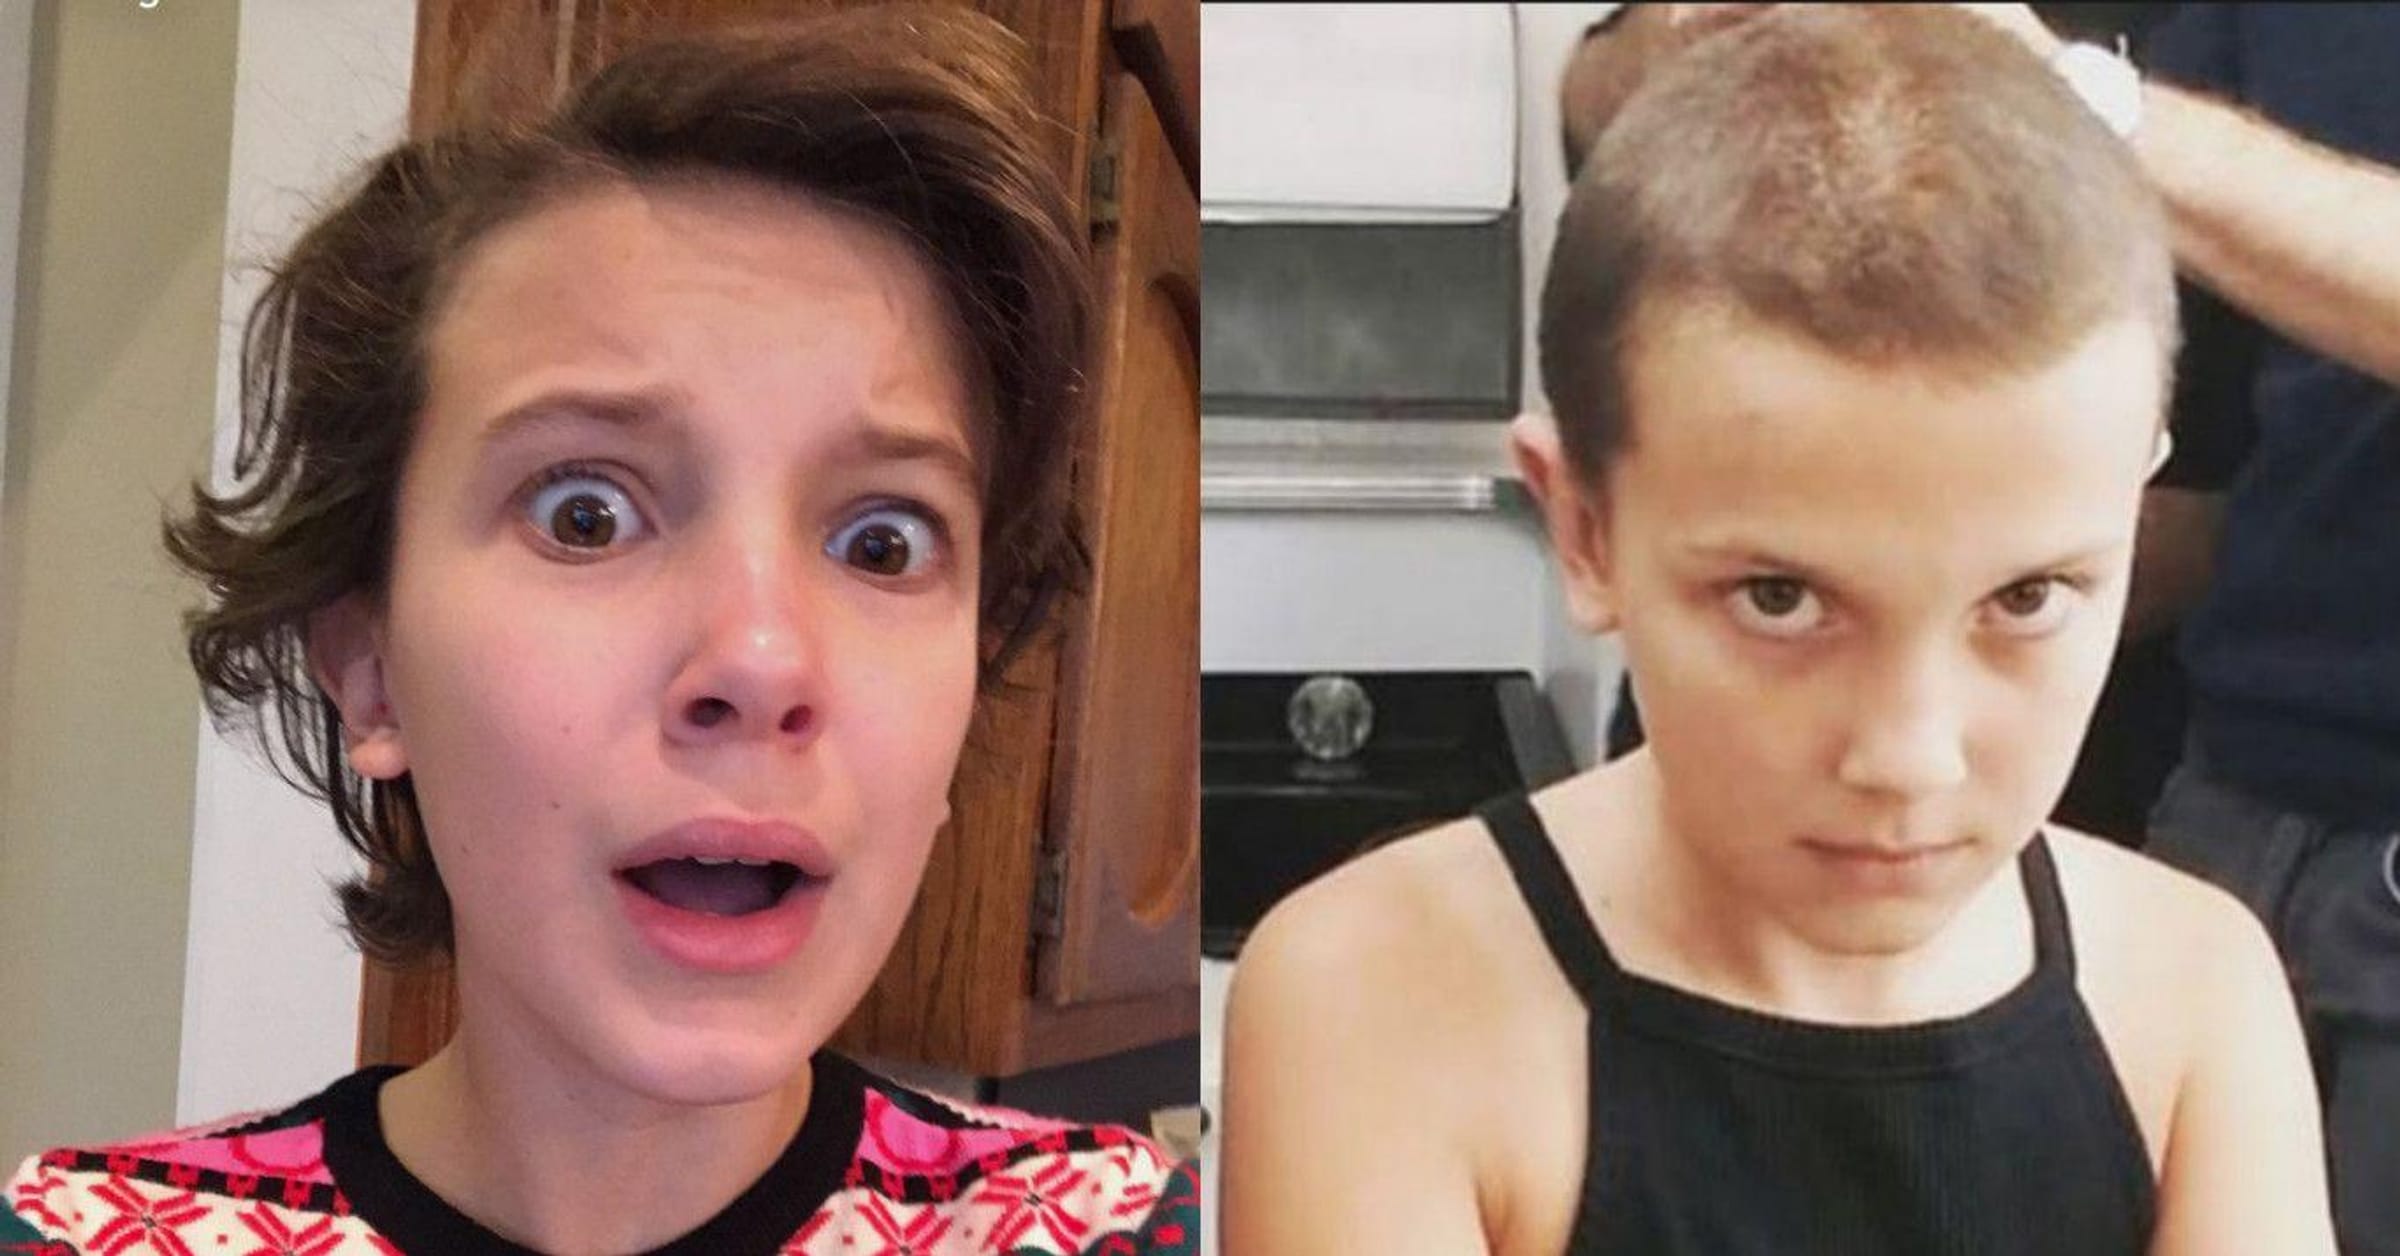 Millie Bobby Brown's Bob Haircut For Her 19th Birthday